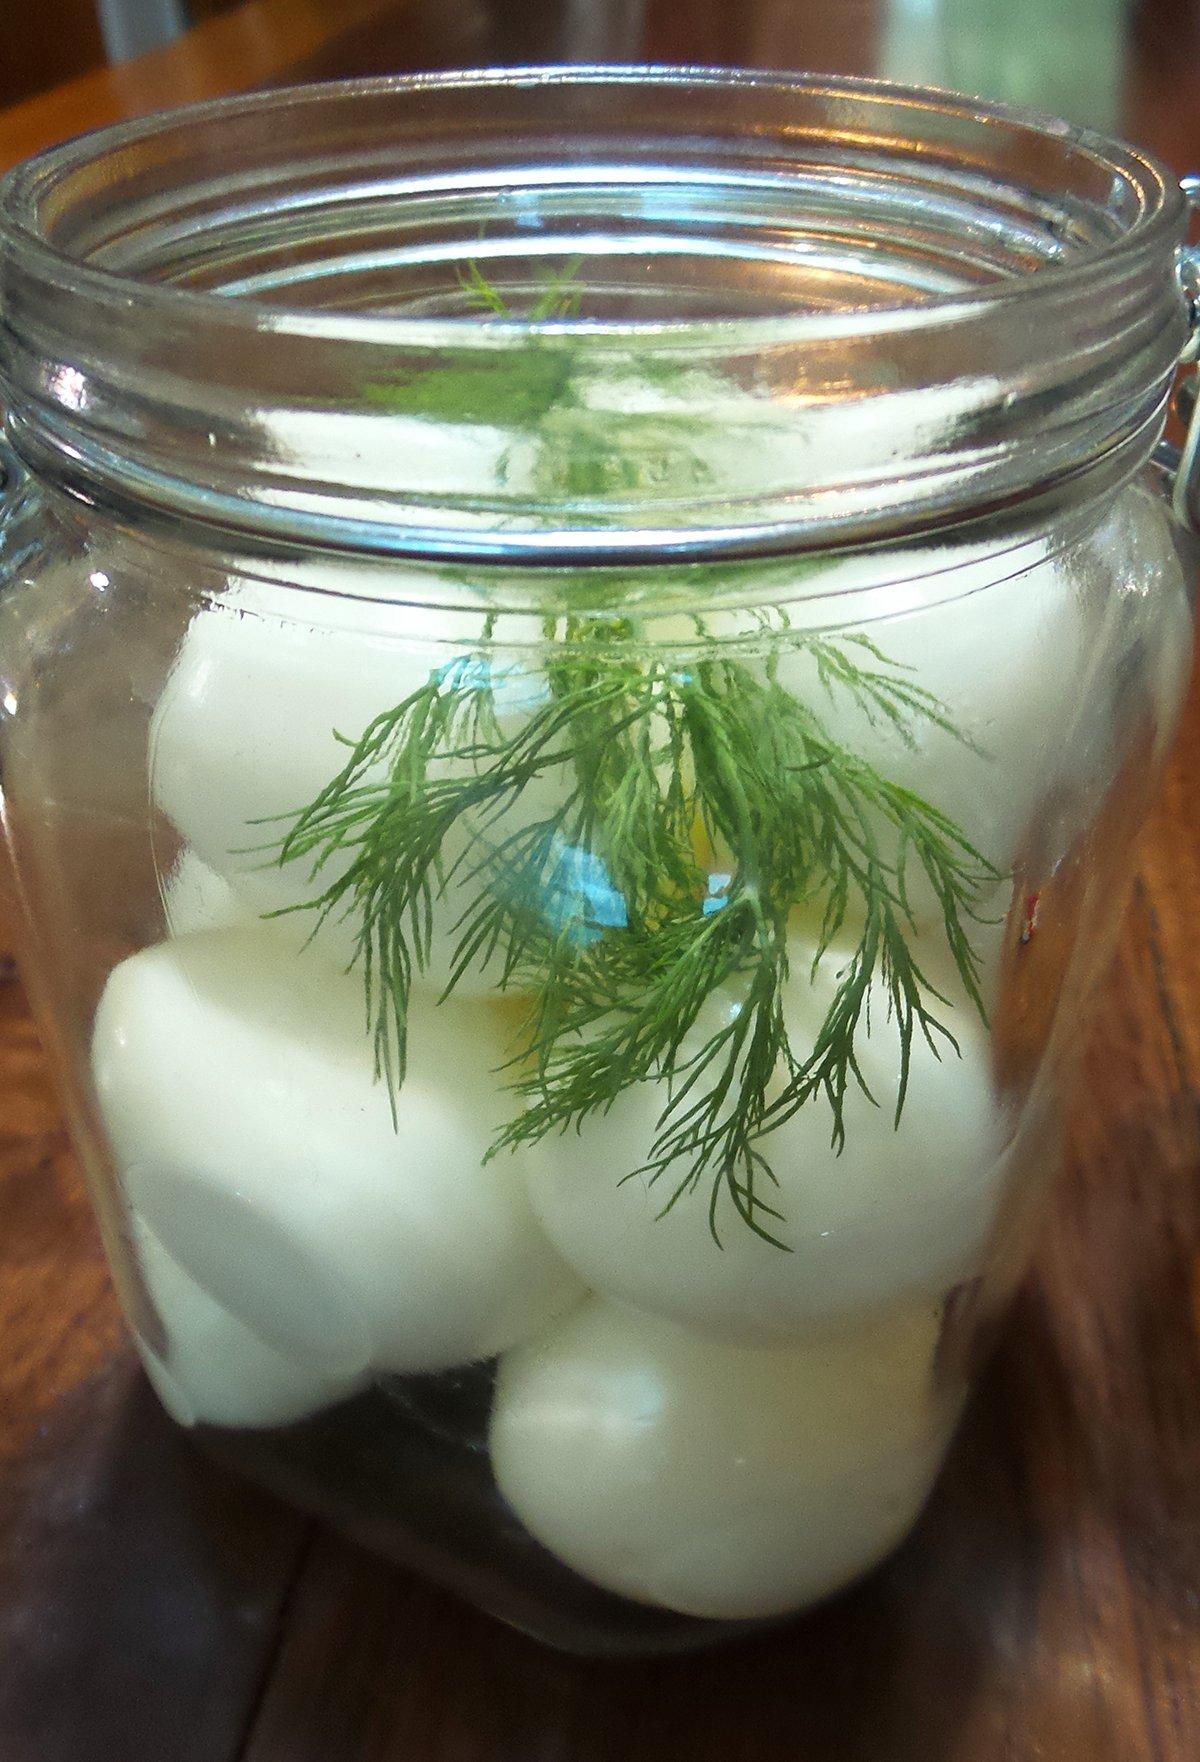 Pack the hard boiled eggs into a jar, about a dozen to a quart, and drop in a sprig of dill.